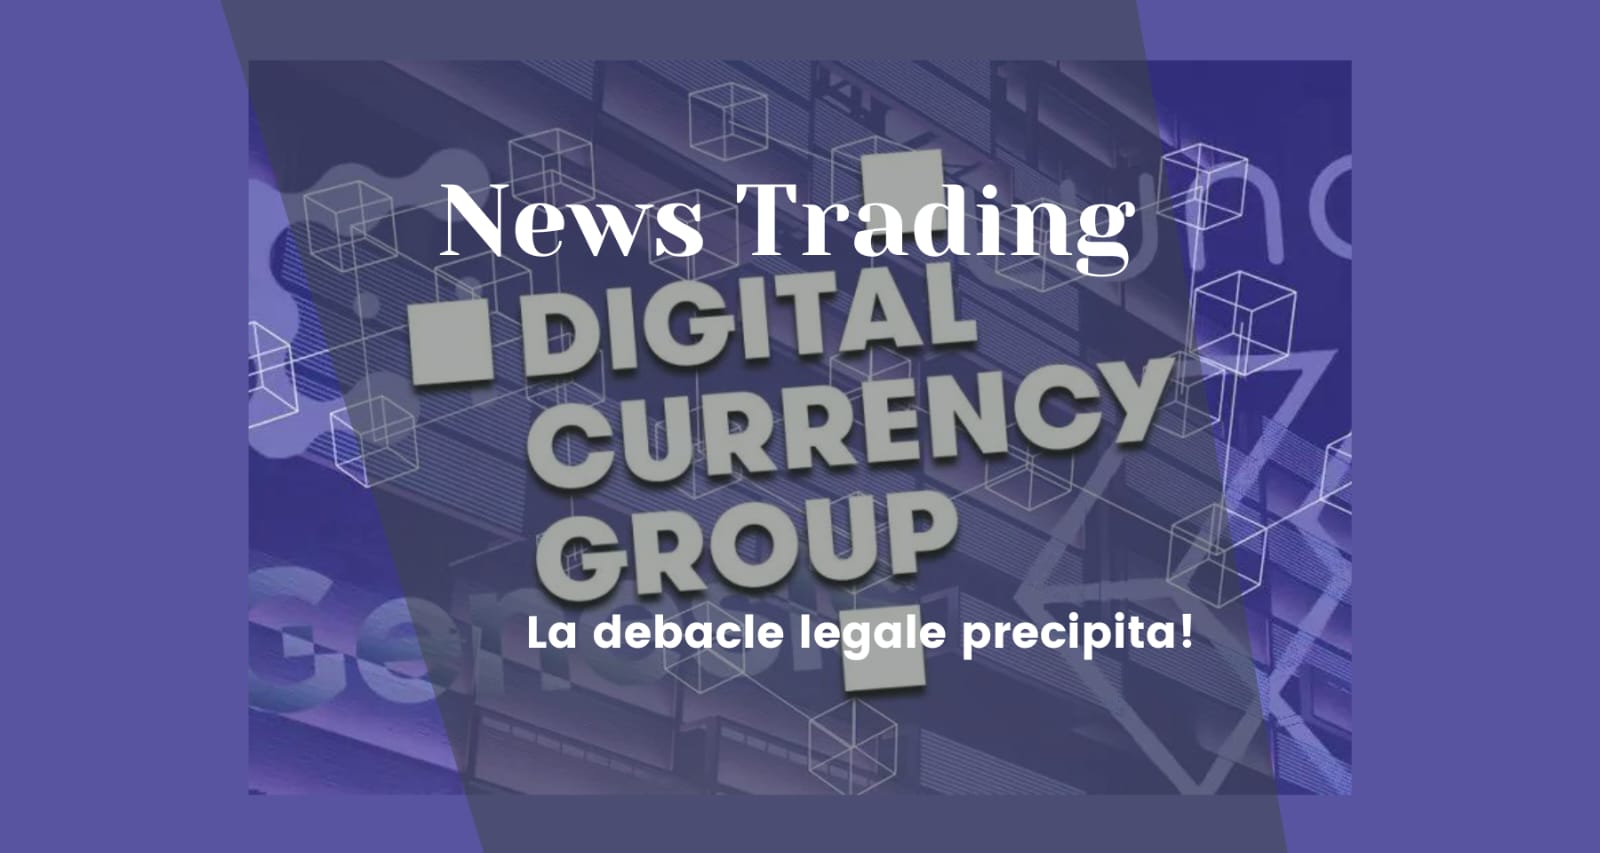 Digital Currency Group (DCG)